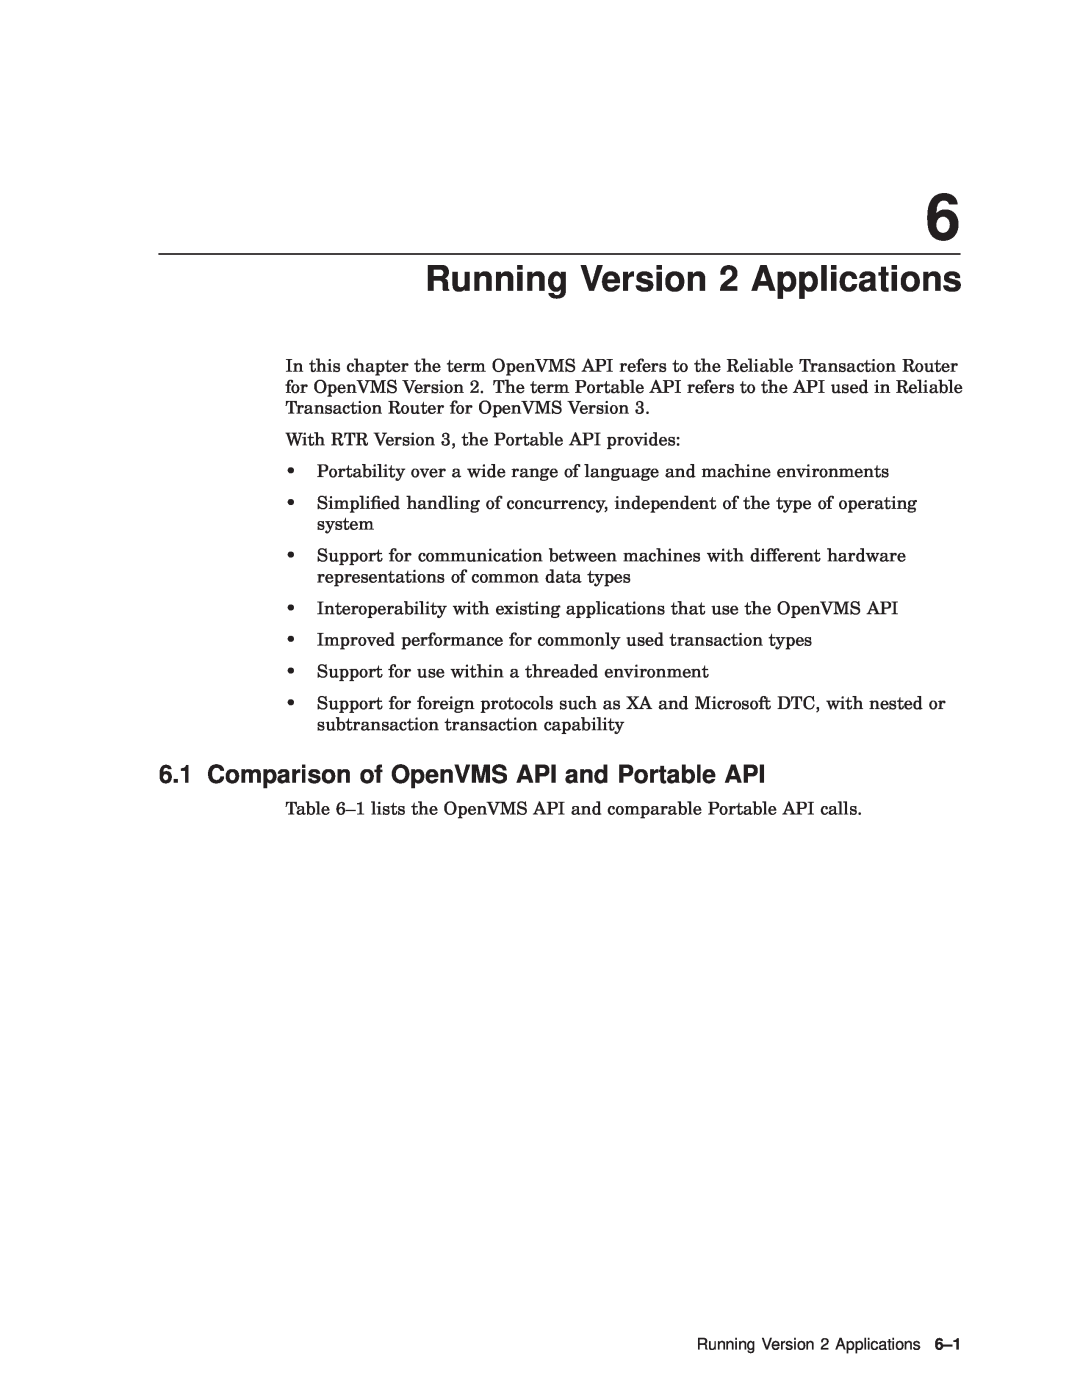 Compaq AAR-88LB-TE manual Running Version 2 Applications, Comparison of OpenVMS API and Portable API 